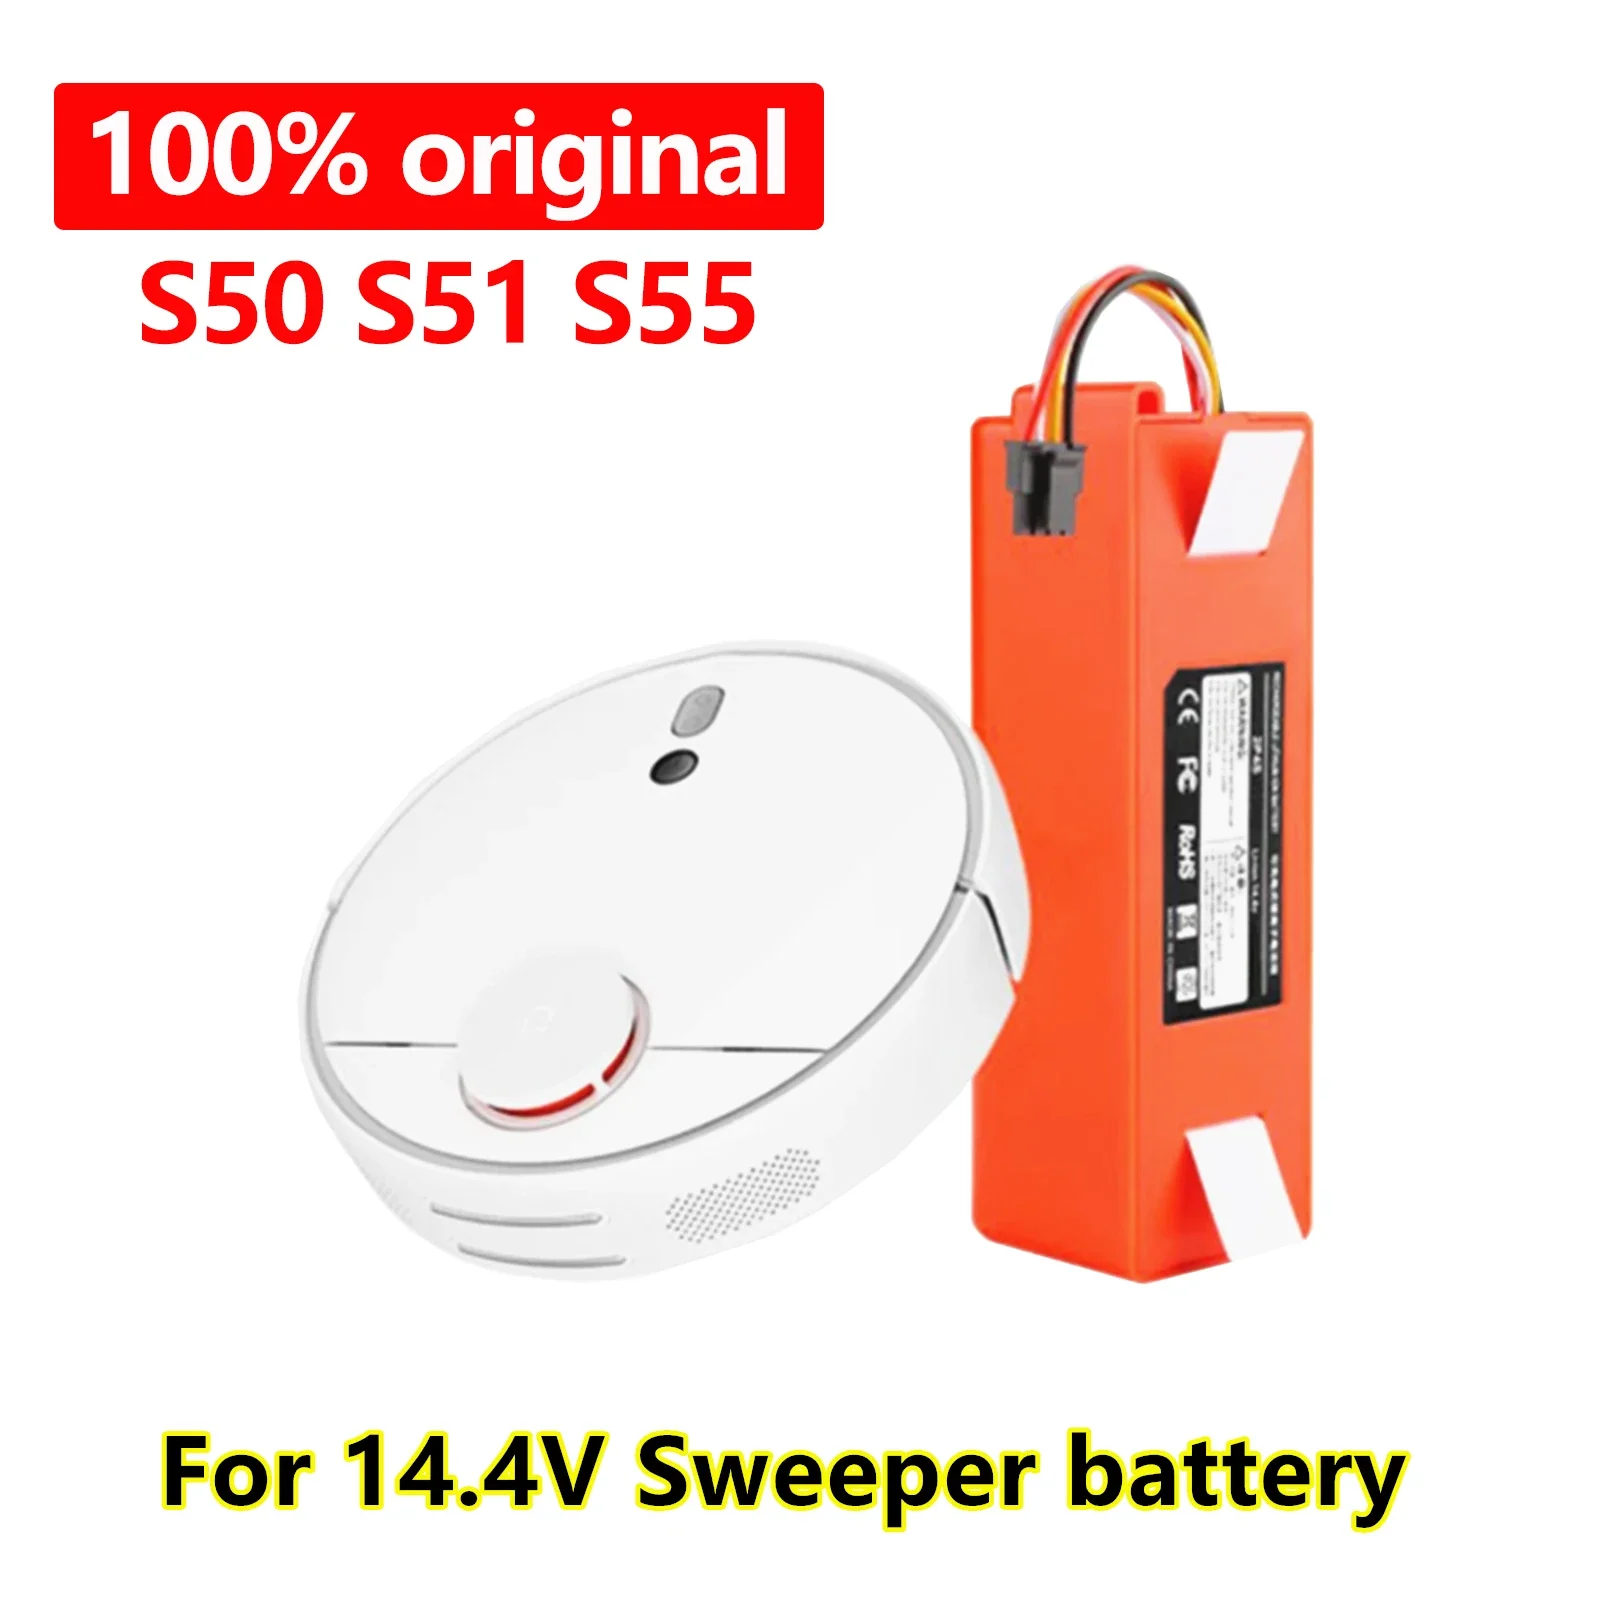 

14.4V li-ion Battery Robotic Vacuum cleaner Replacement Battery for Xiaomi Robot Roborock S50 S51 S55 Accessory Spare Parts